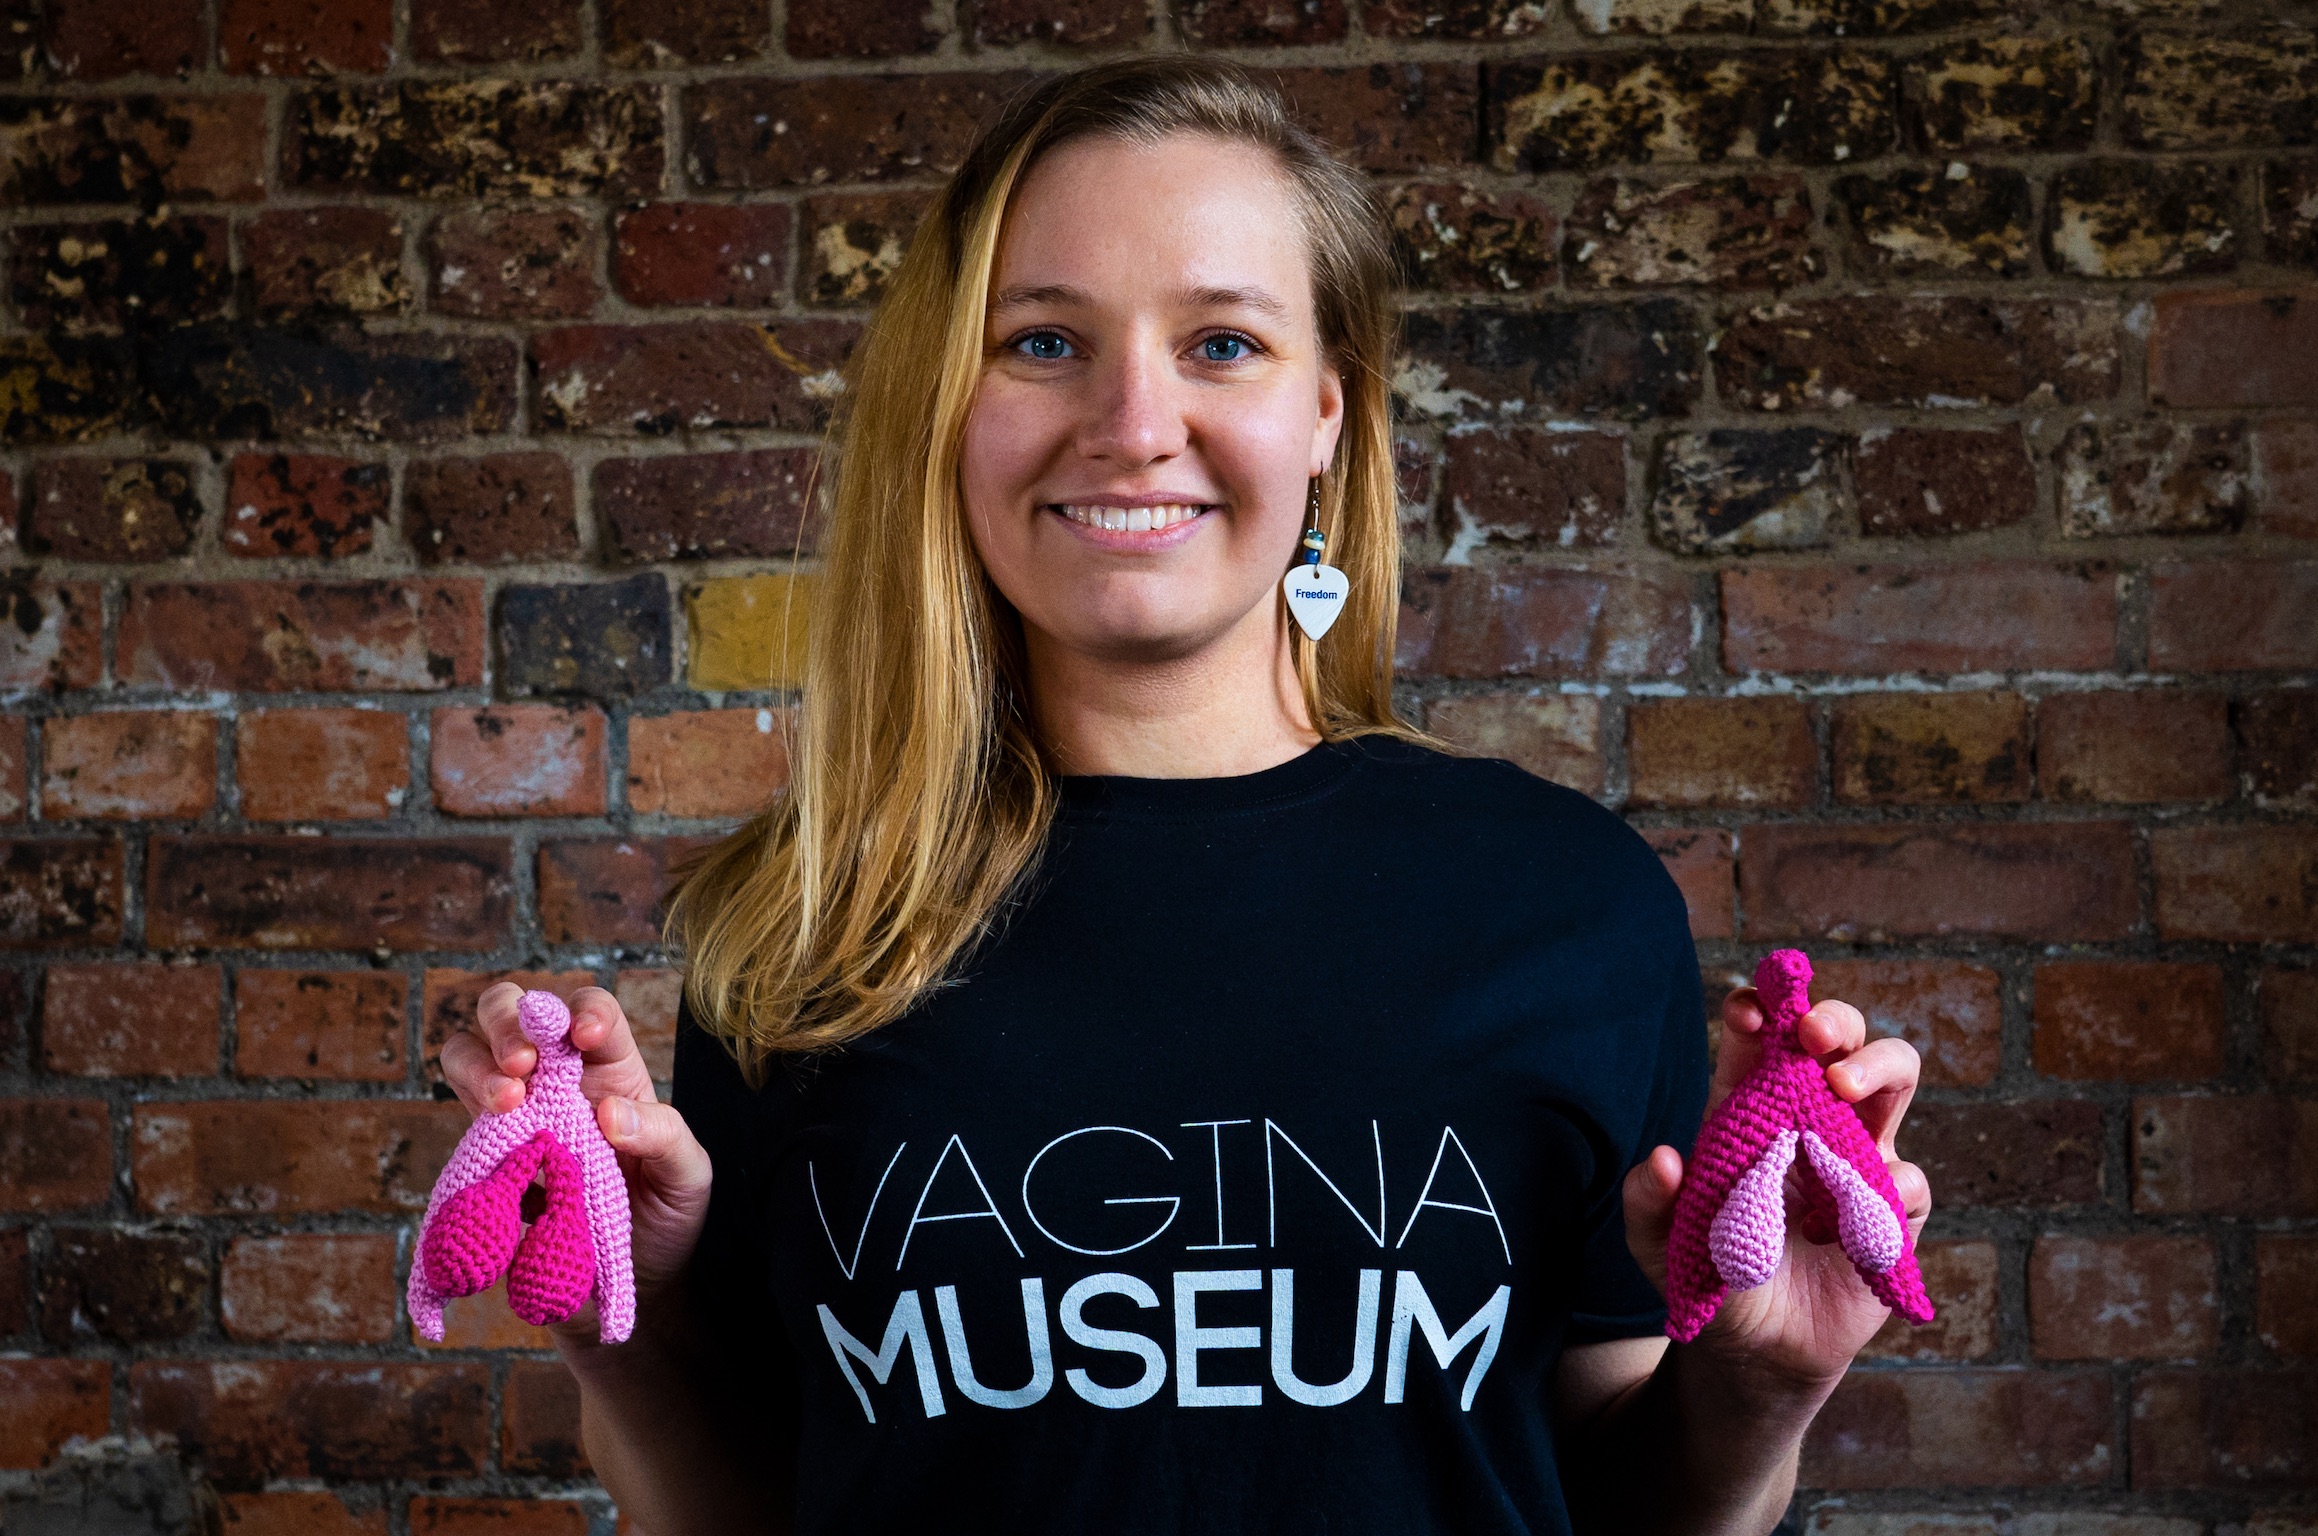 World's First Vagina Museum Opens Tomorrow